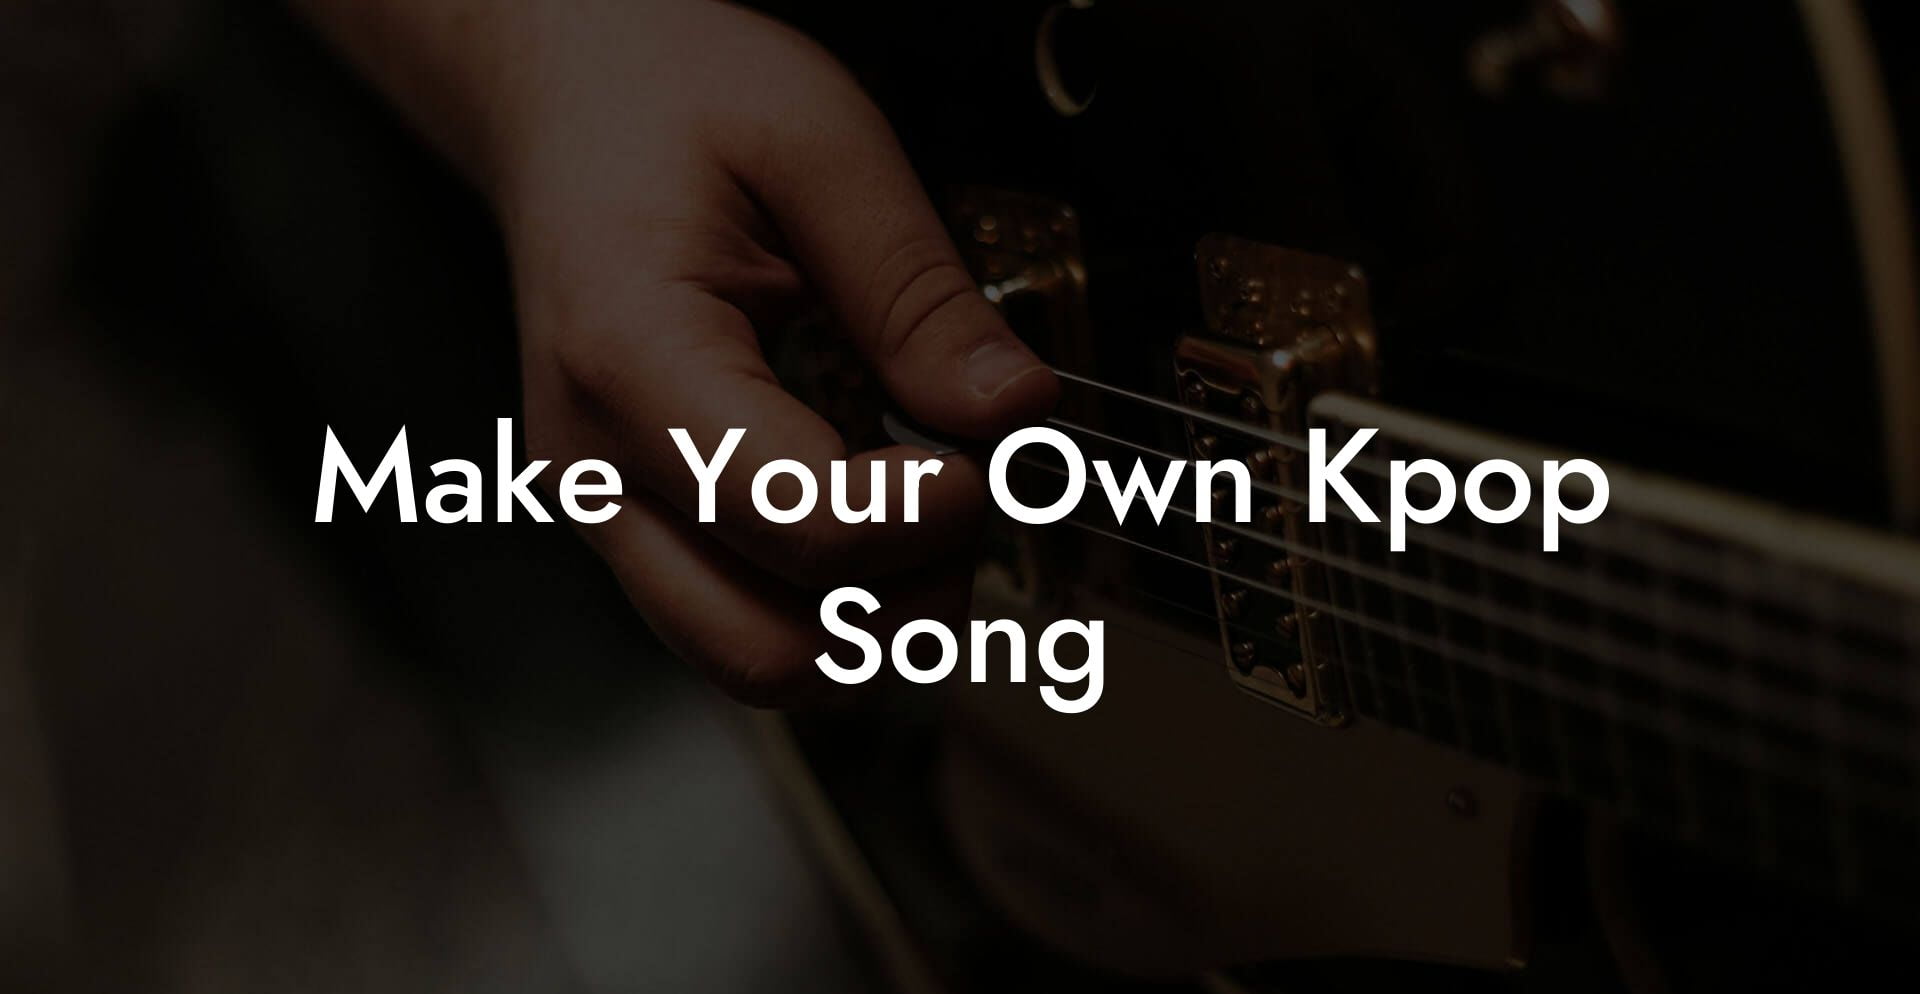 make your own kpop song lyric assistant